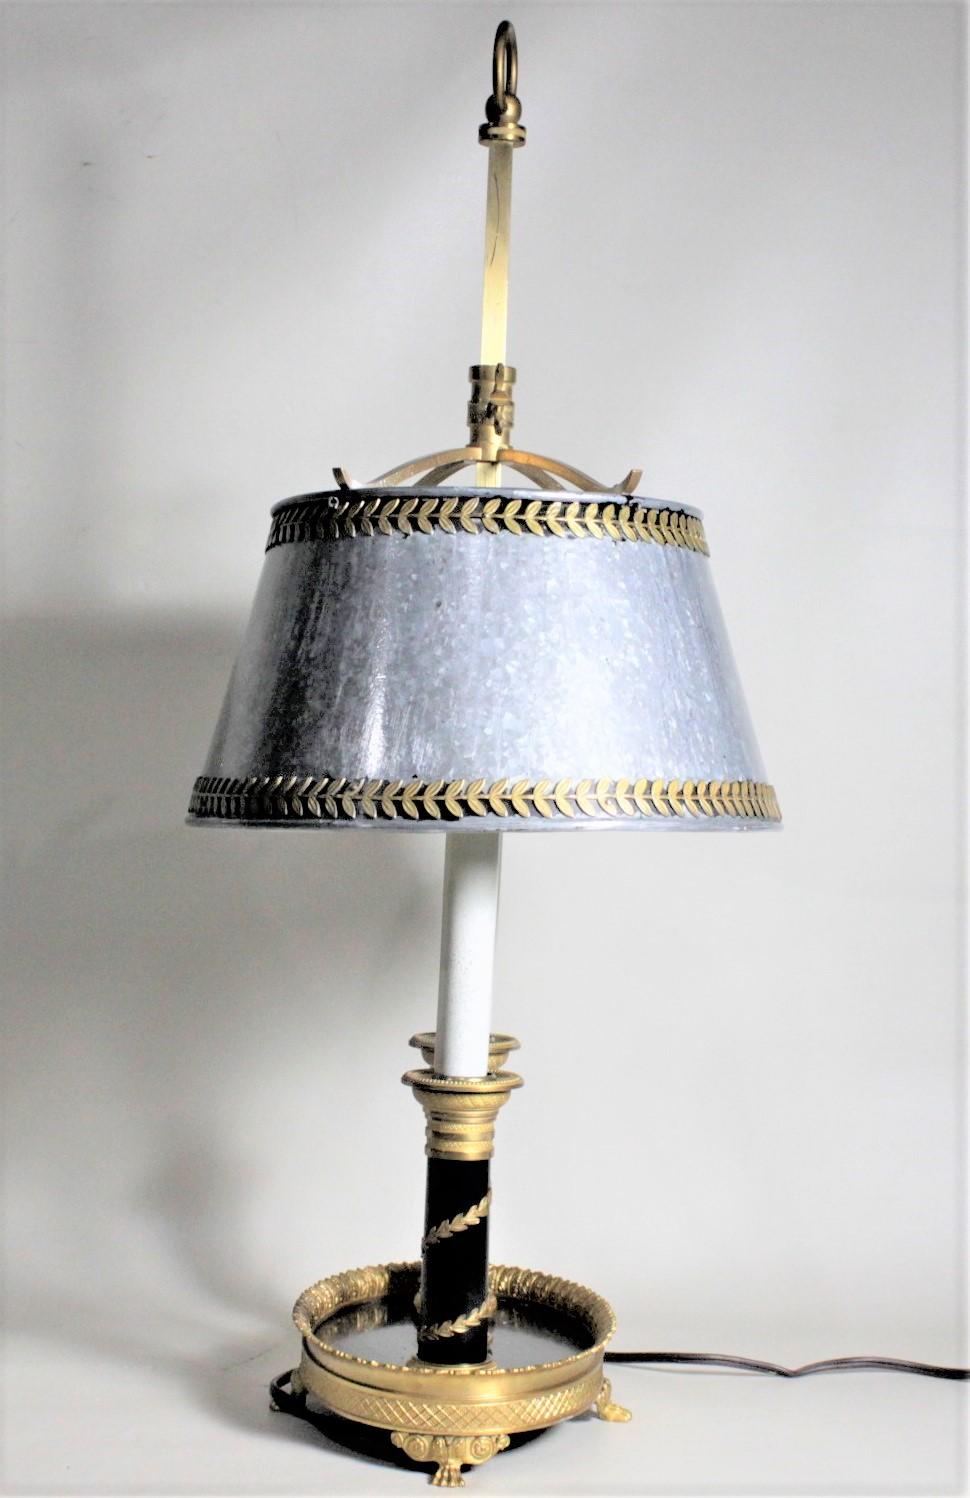 Molded Antique Styled French Toleware Table or Desk Lamp with Solid Brass Frame